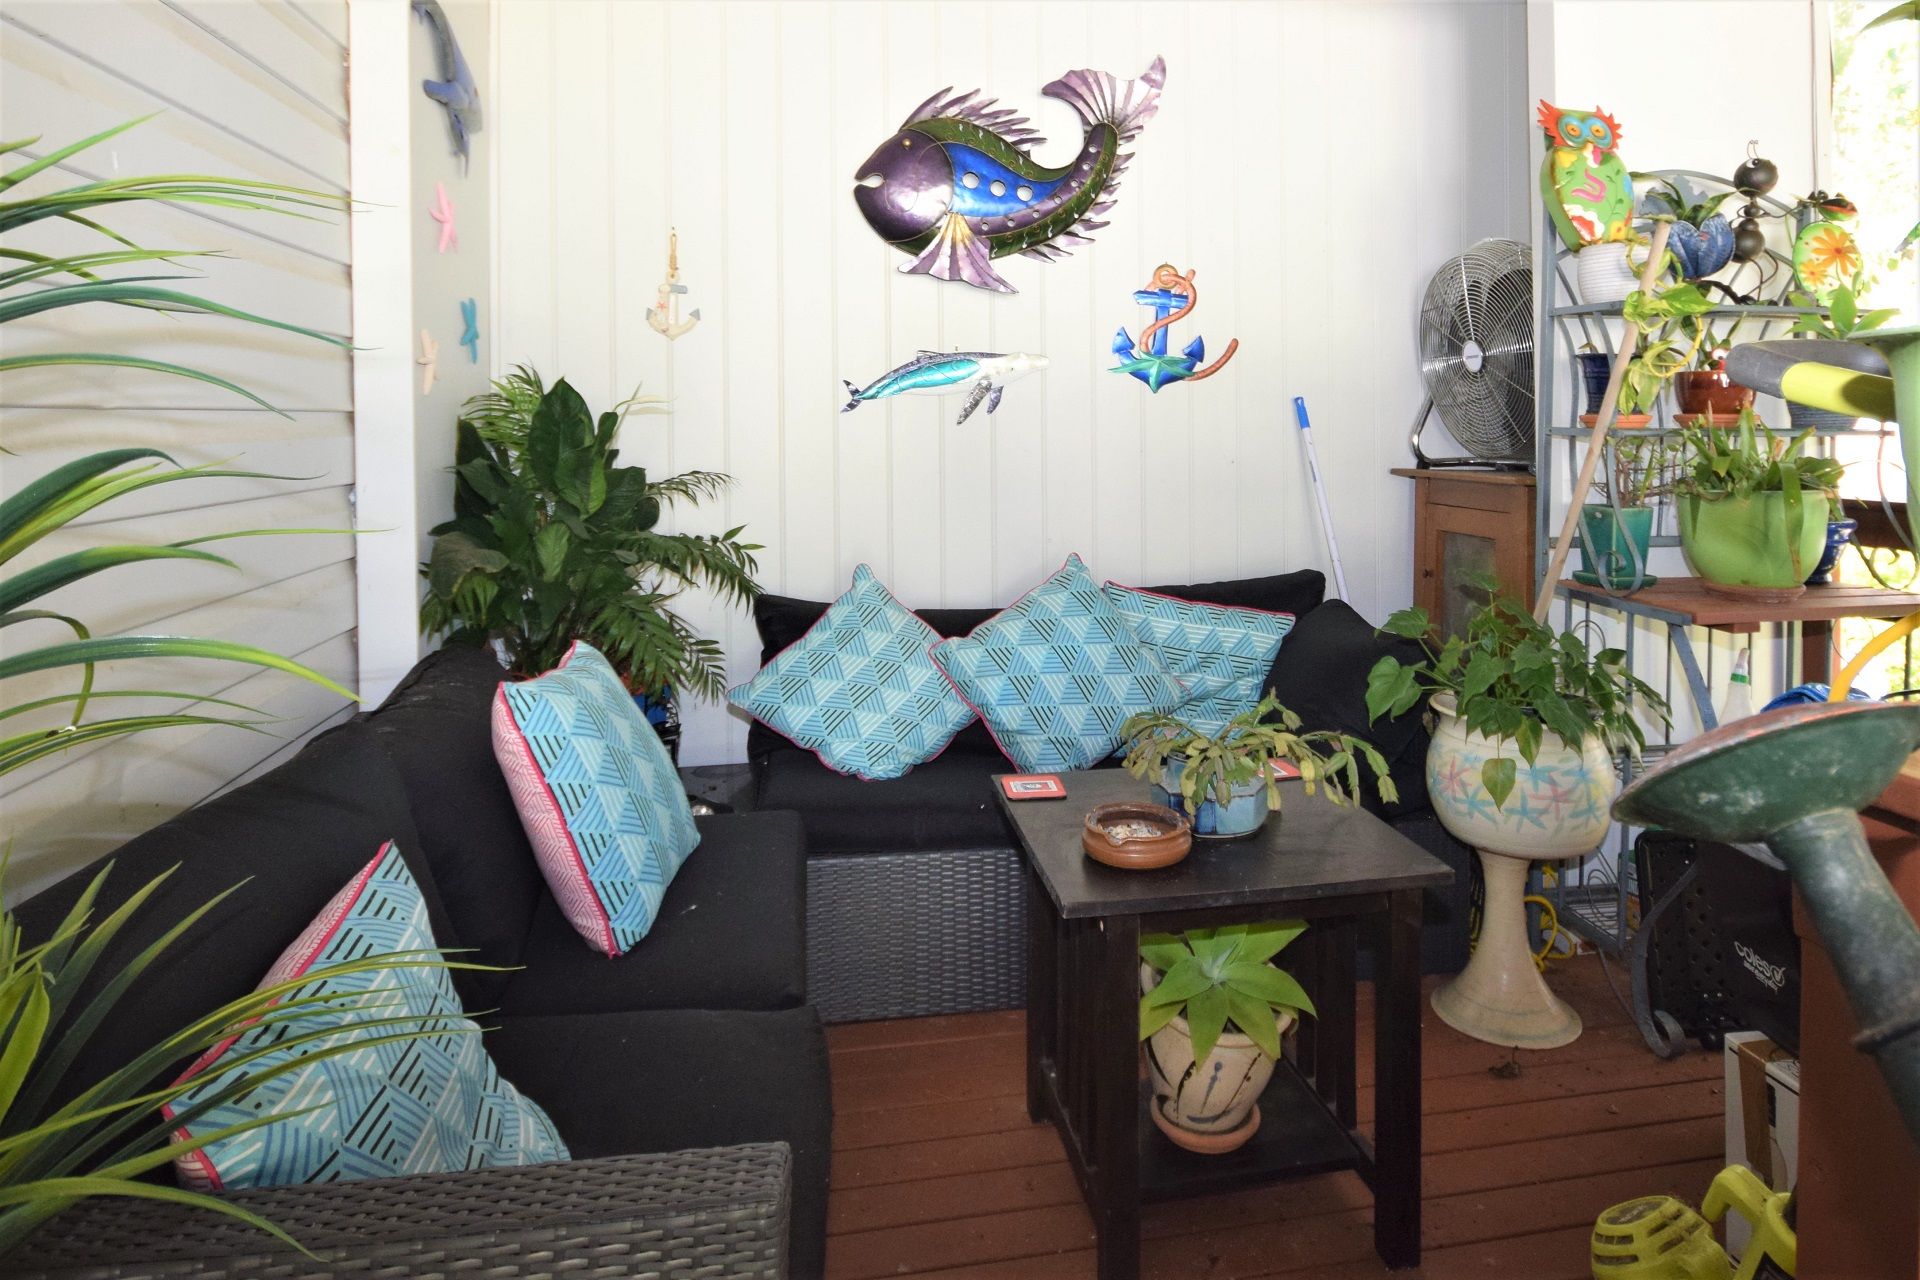 Nambucca Heads Real Estate: Relax & Enjoy the Lifestyle